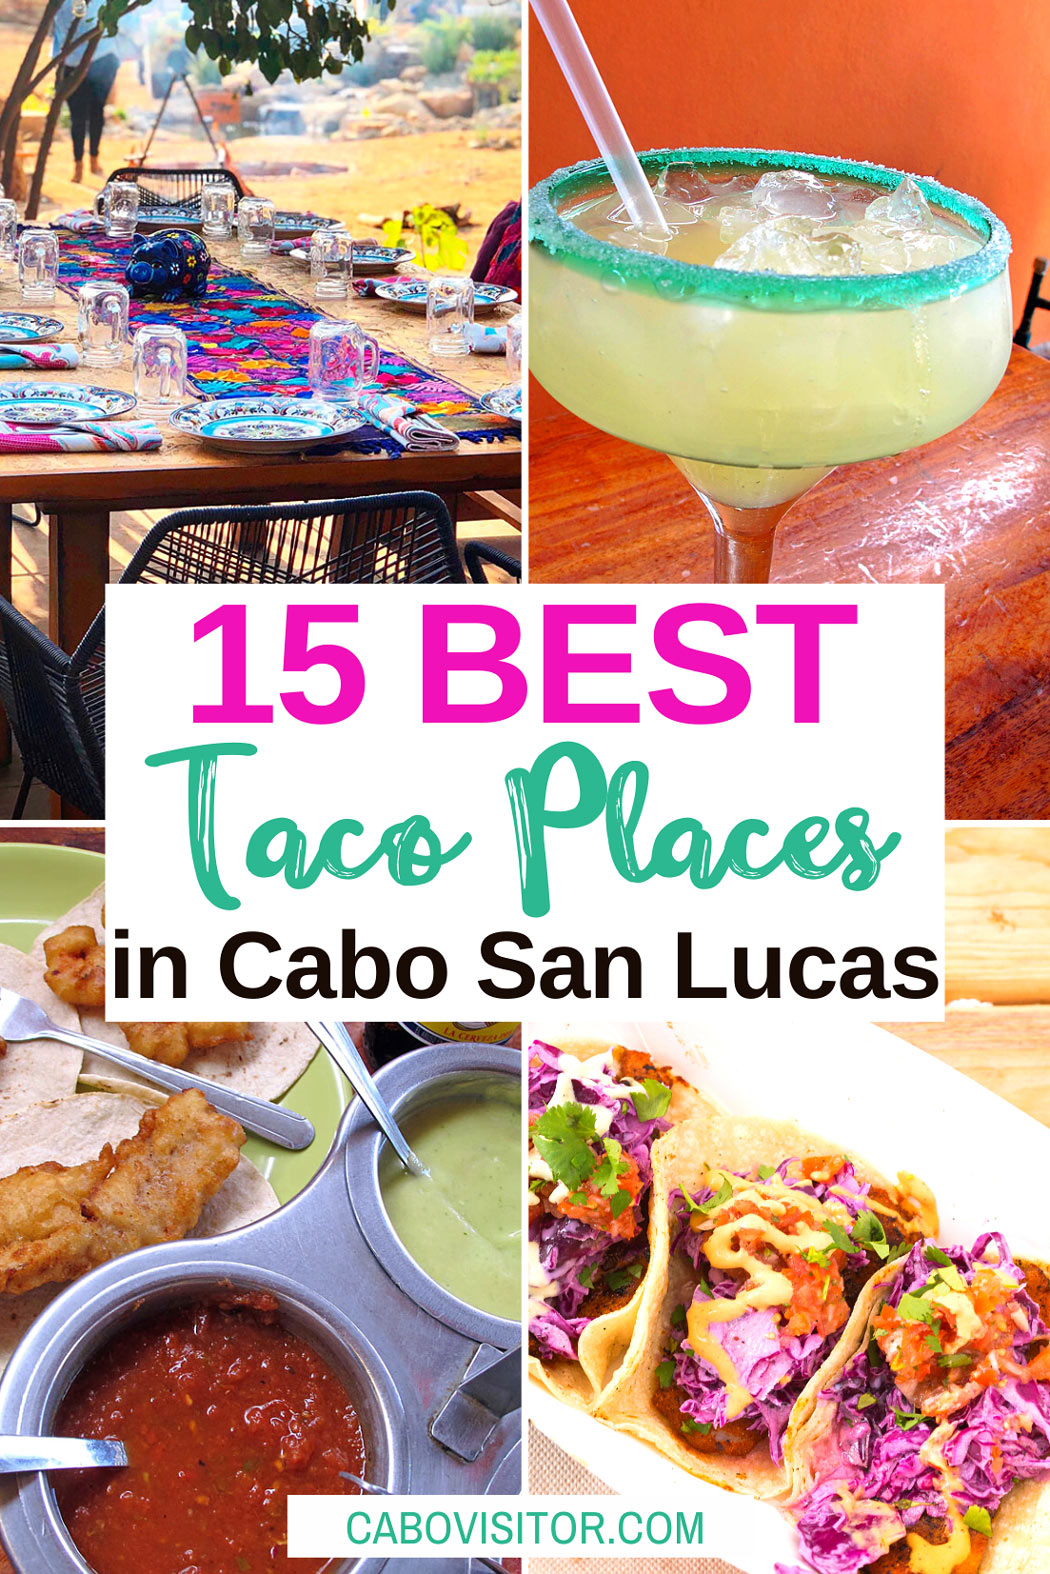 Best Tacos in Cabo San Lucas